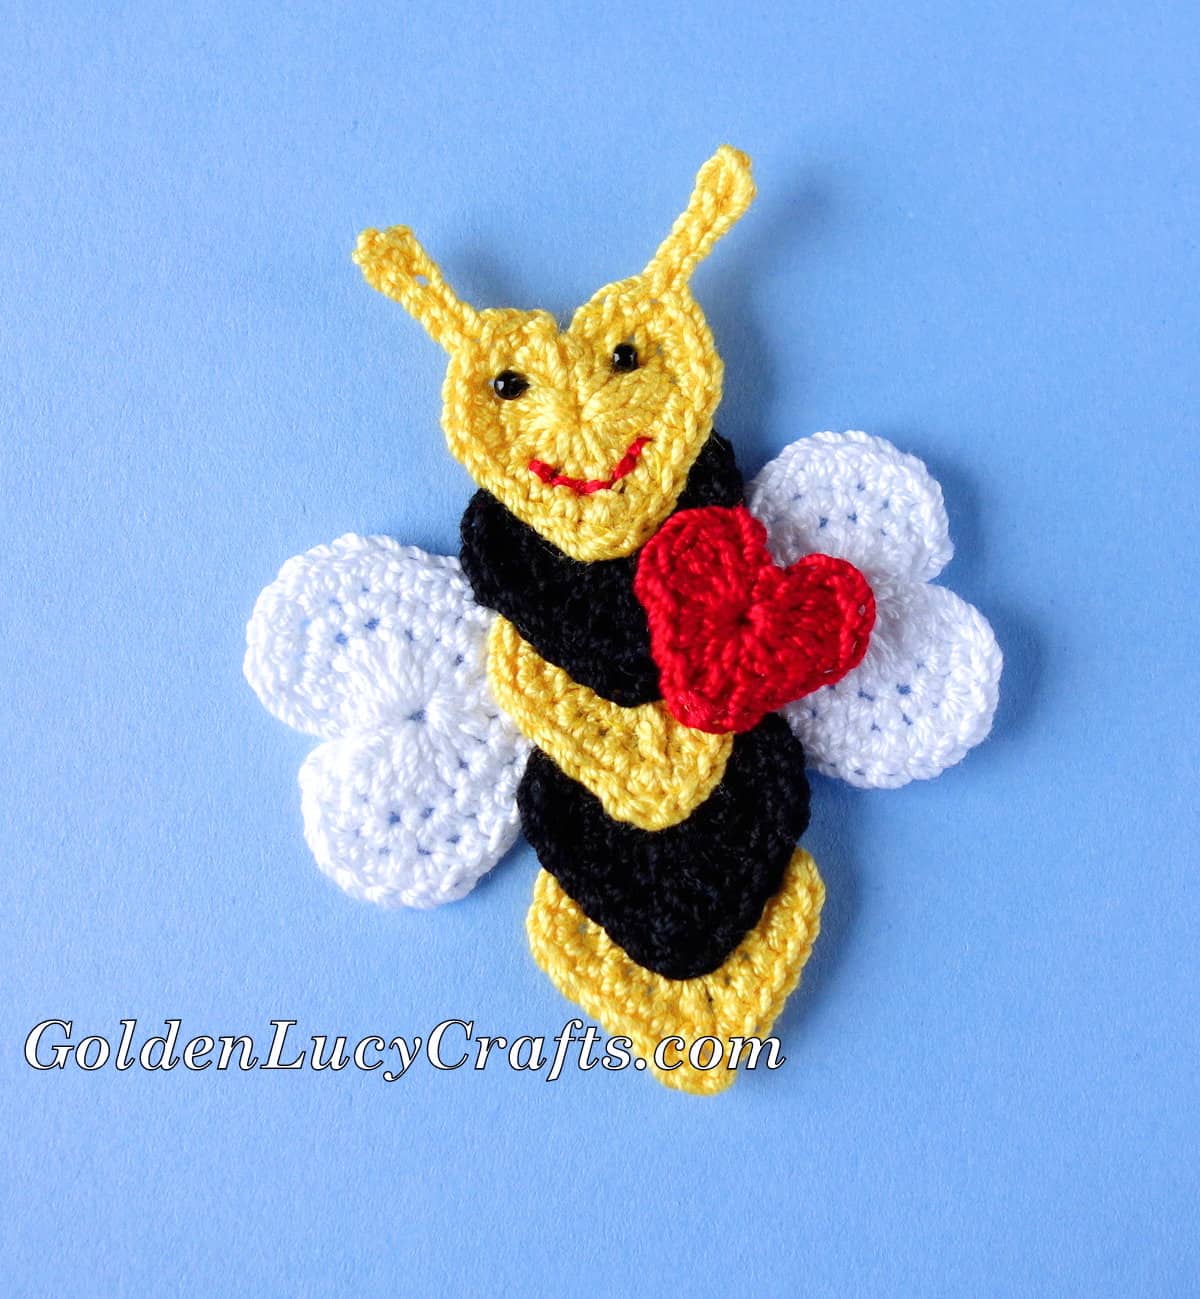 Crochet bee applique made from hearts.